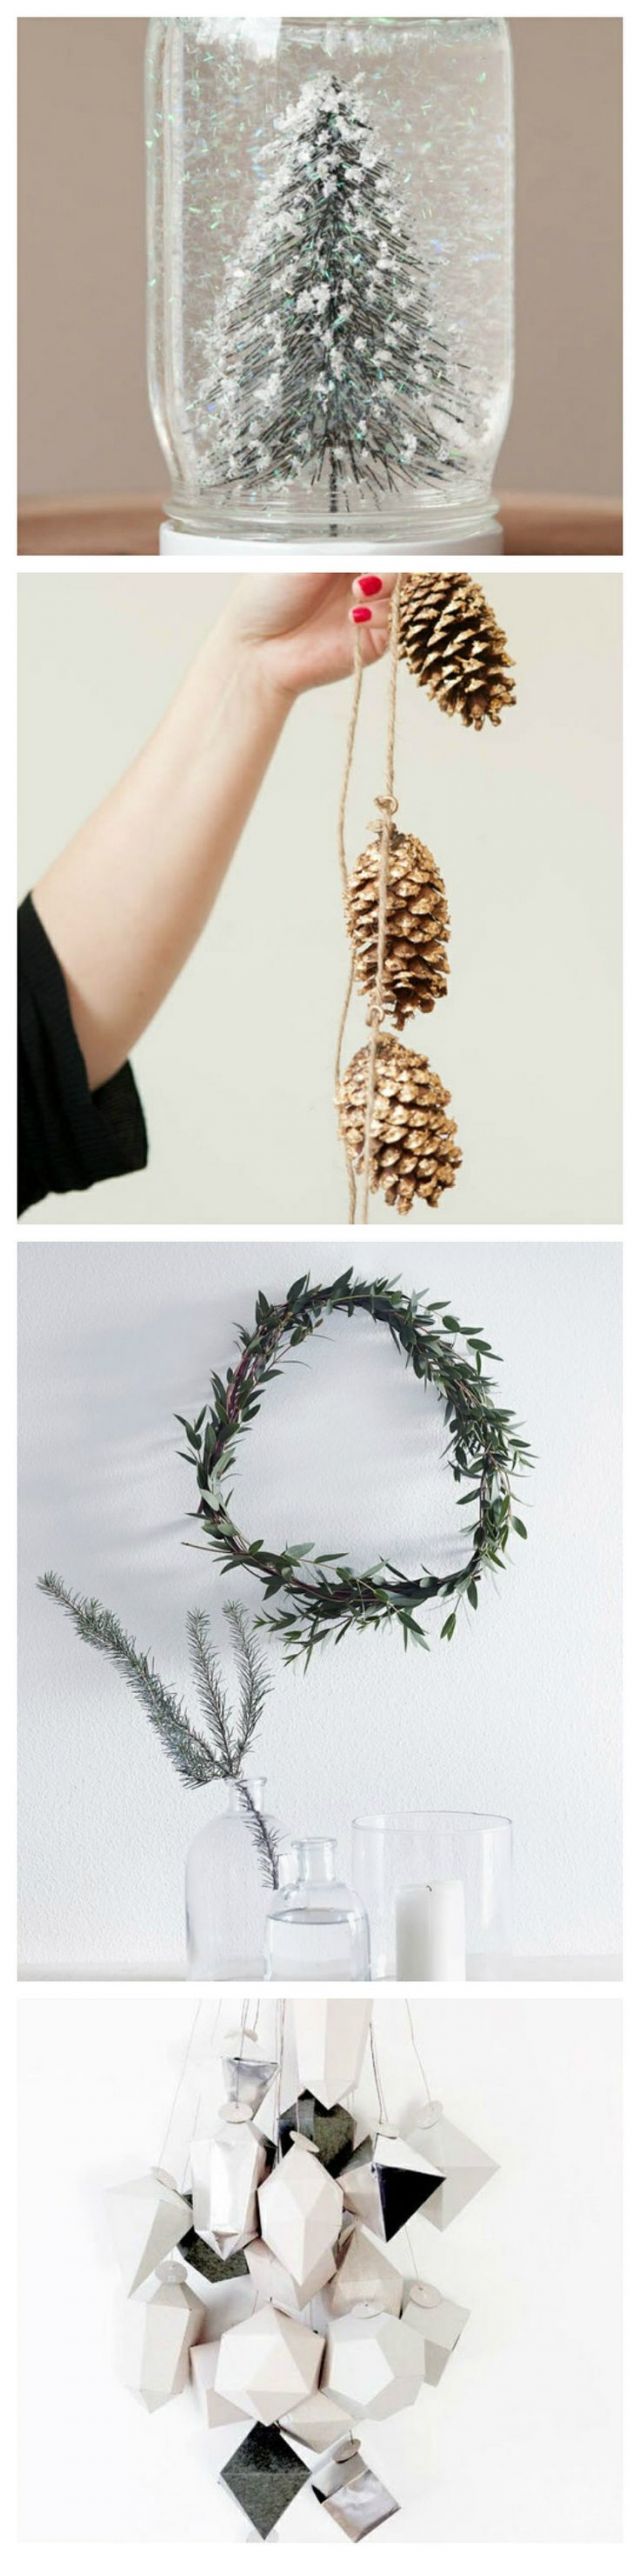 Pinterest DIY Christmas Crafts
 5 Easy DIY Christmas Crafts s and